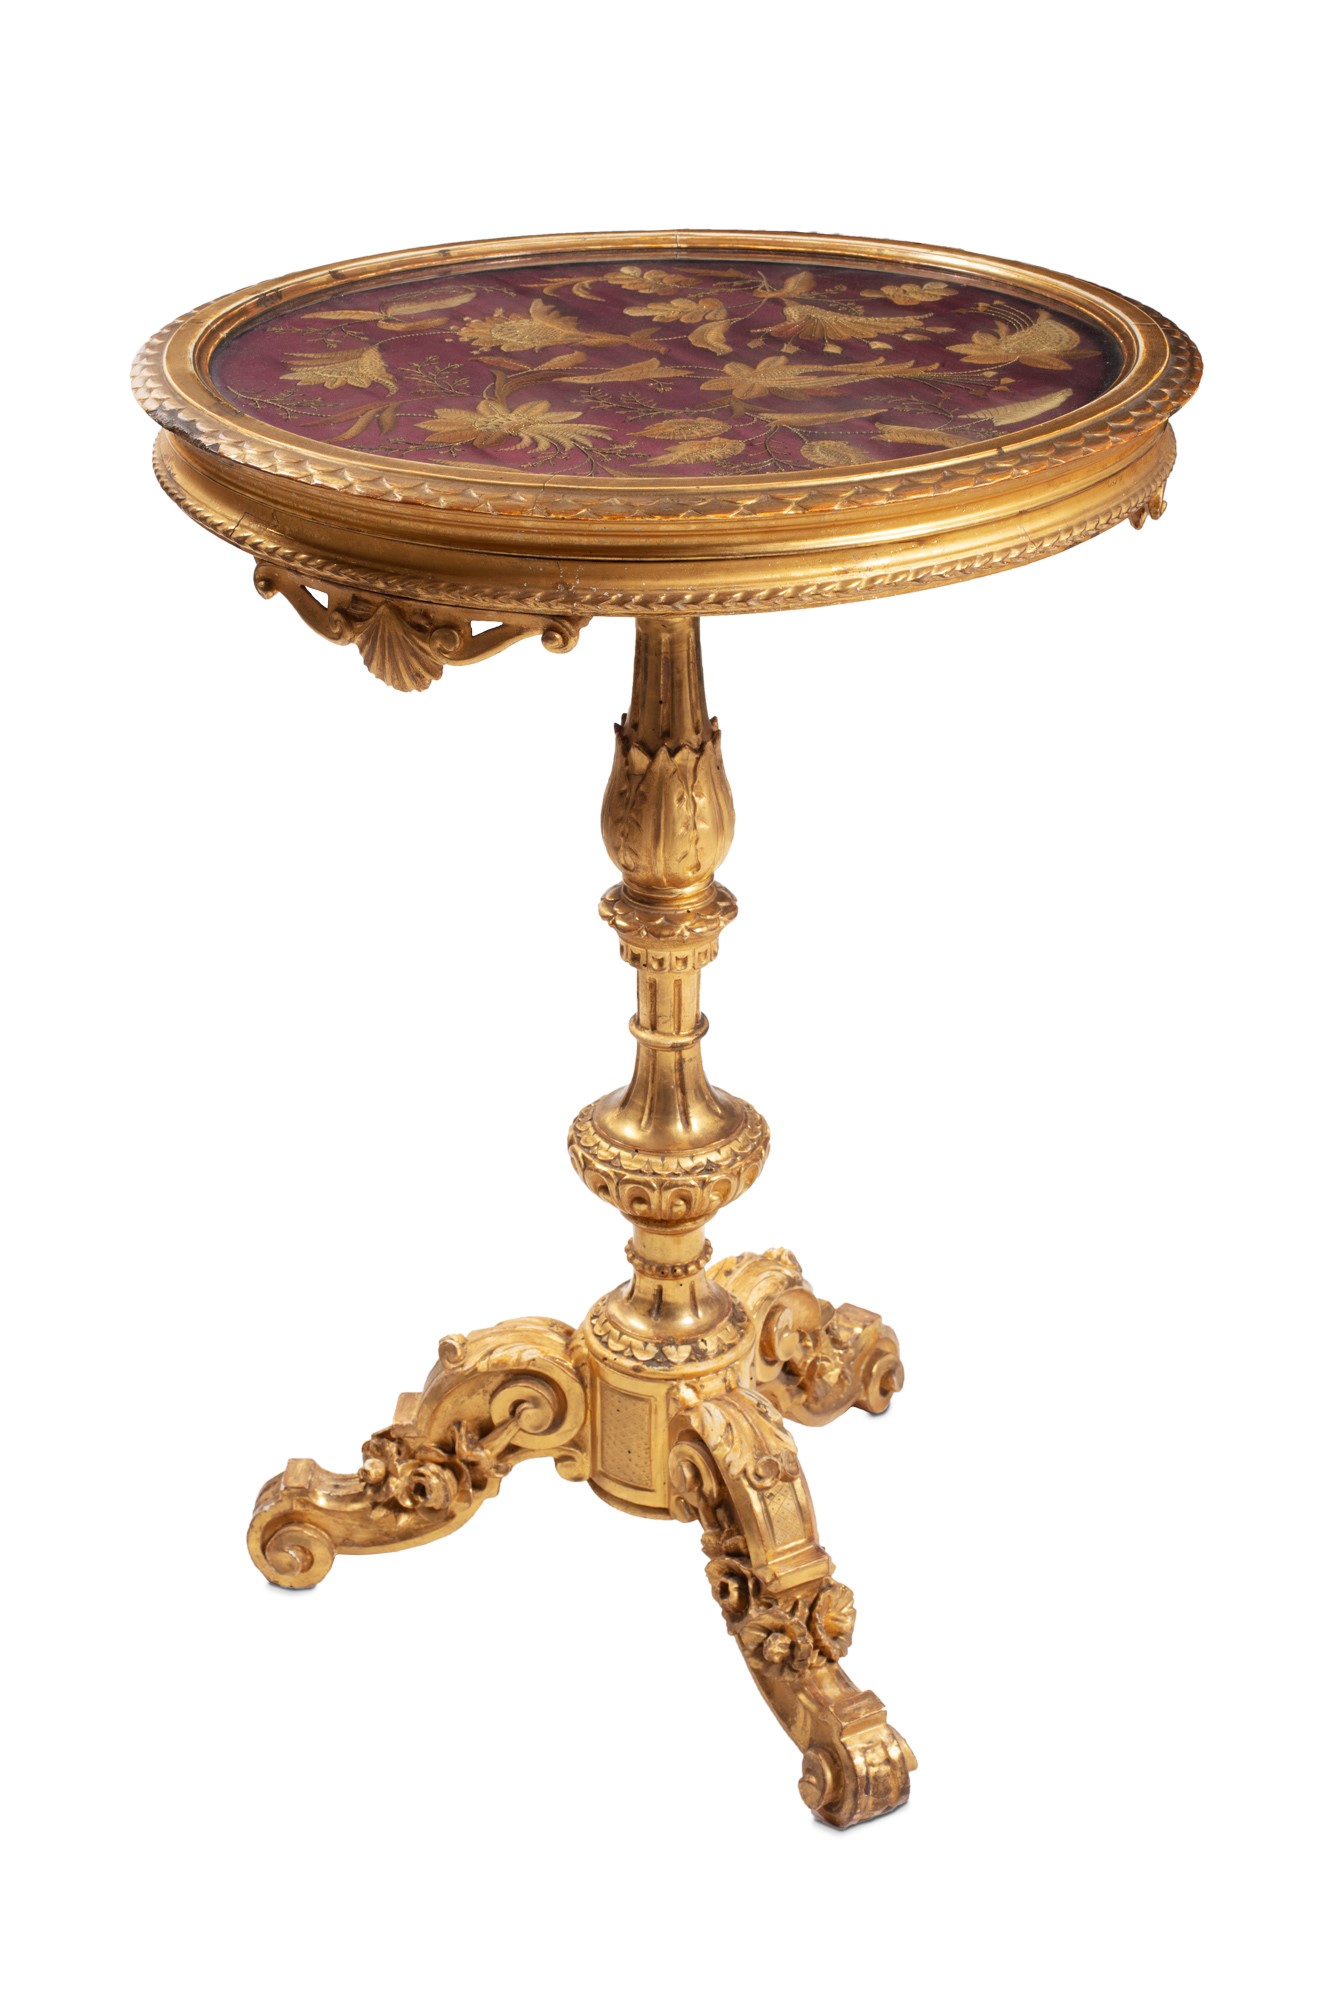 Carved and gilded wooden coffee table manifacture ligure, mid 19th century, with tripod base,